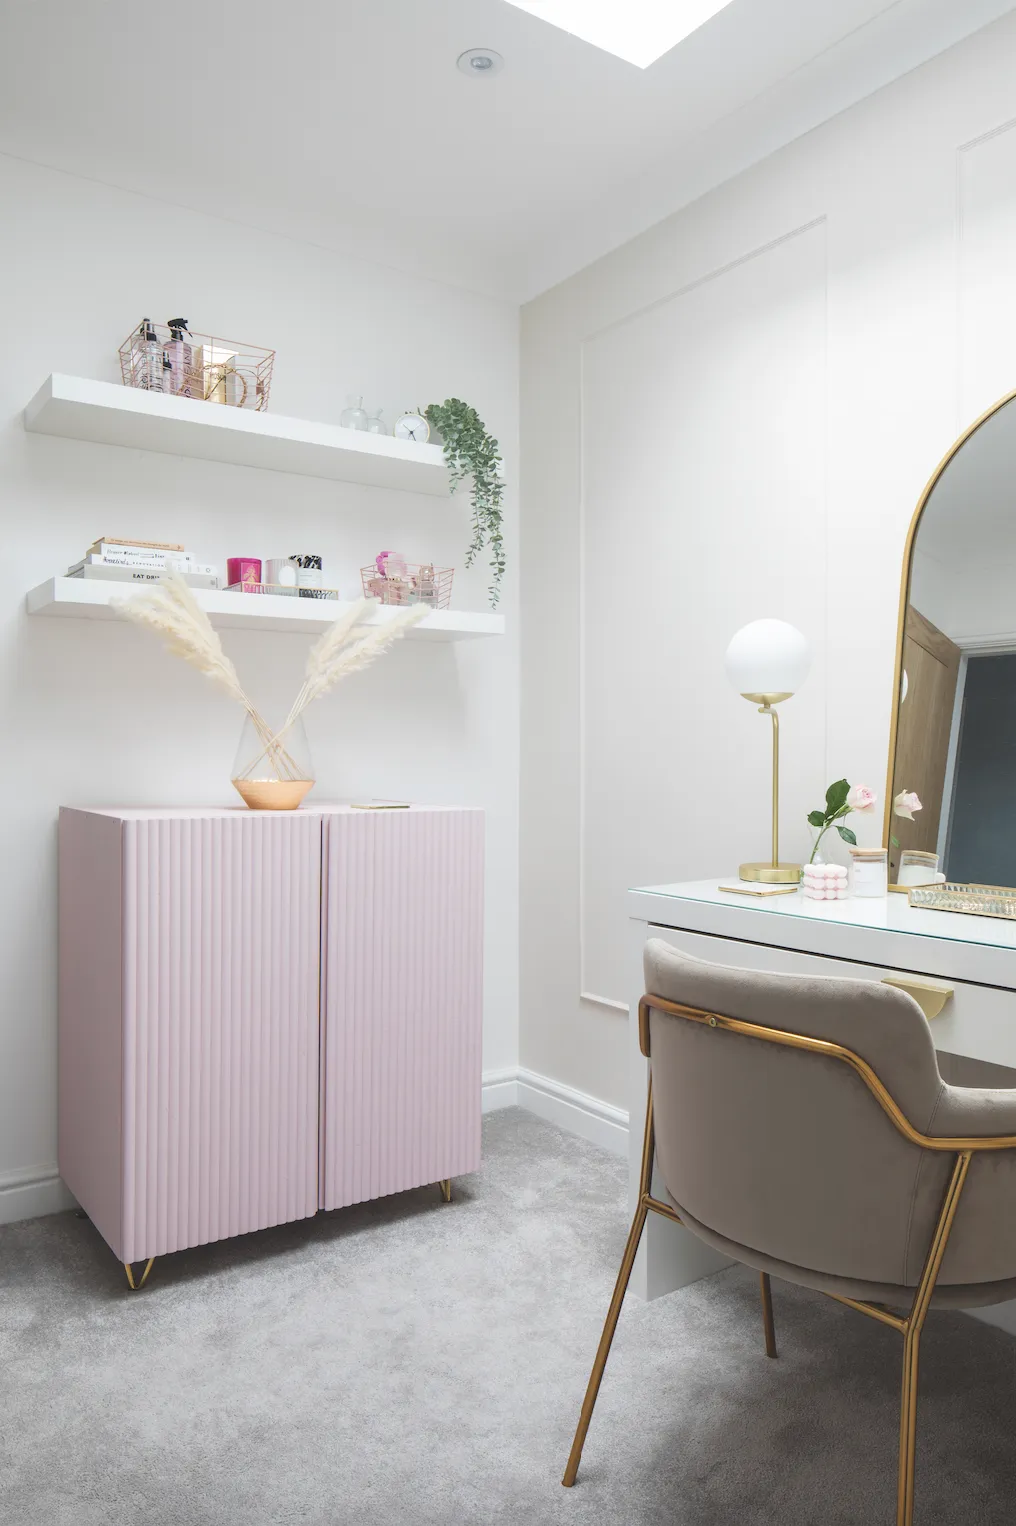 ‘Originally, the guest bedroom walls were pinky-brown, but when it became my office, I didn’t find it very relaxing,’ says Becca. ‘We made wall panels with beading and painted in Coty 1, a nude shade by Decorating Centre Online – now the room feels more like us’